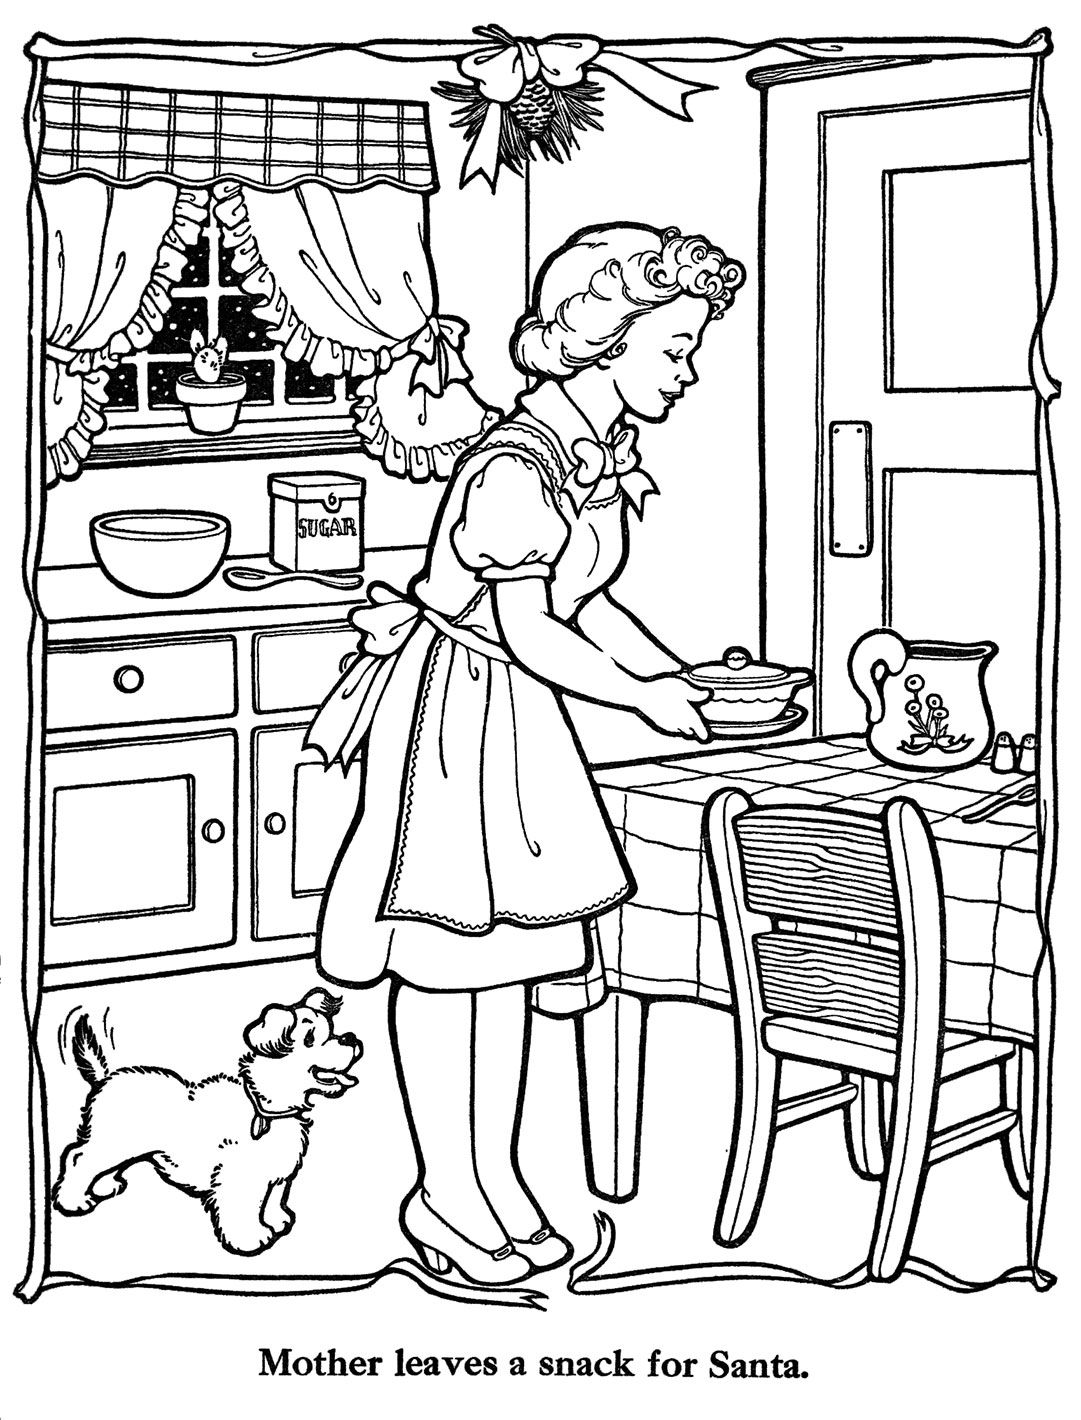 Aesthetic Coloring Pages Christmas - Christmas colouring ...